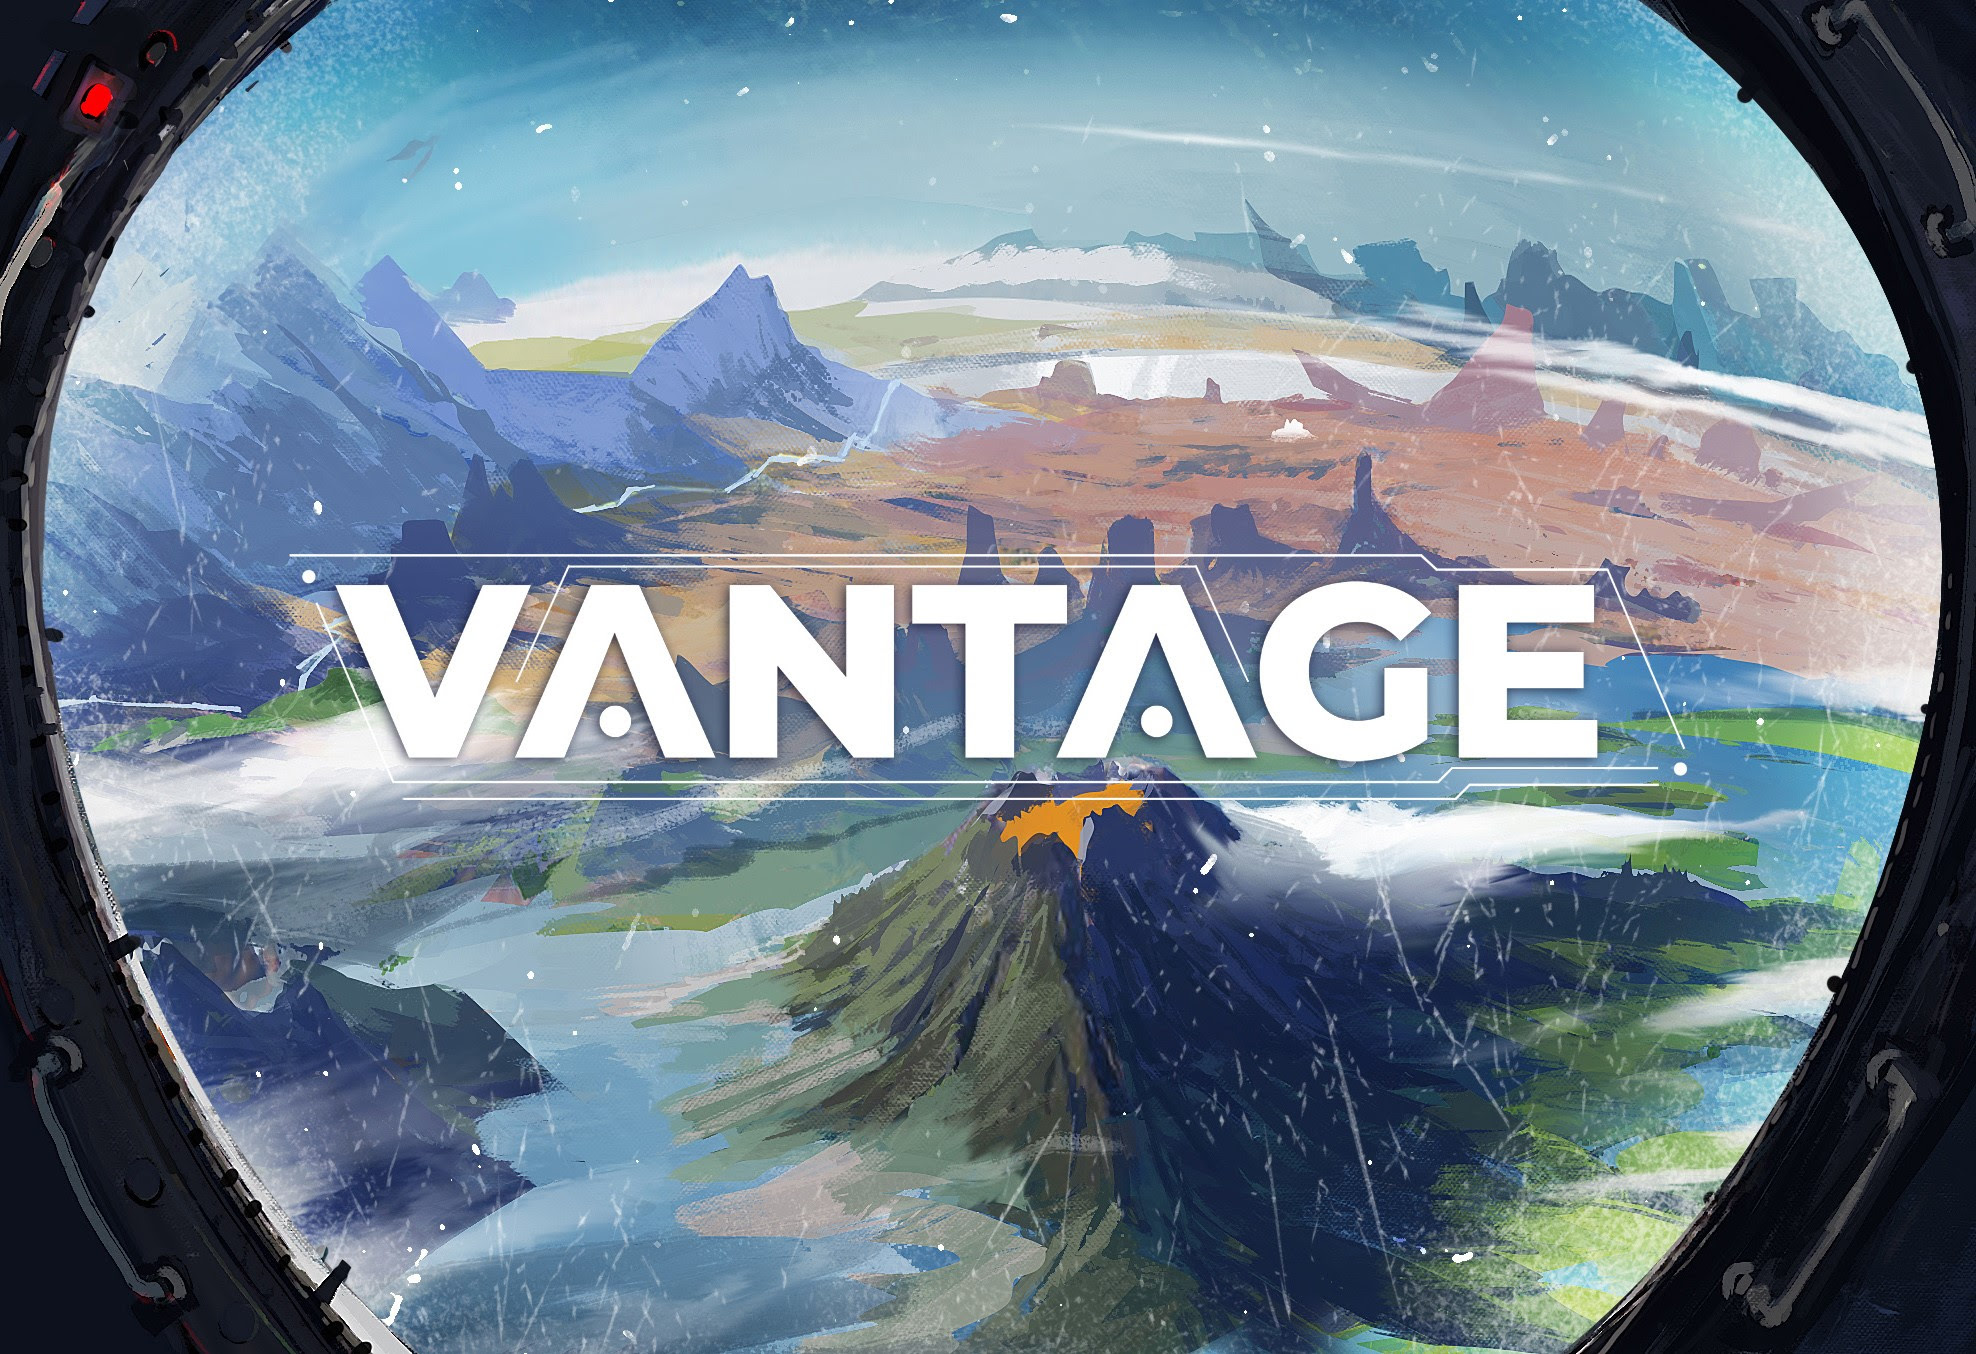 Key art for Vantage features a view of a planet with multiple biomes as seen through the porthole of an escape capsule dropping in from orbit.